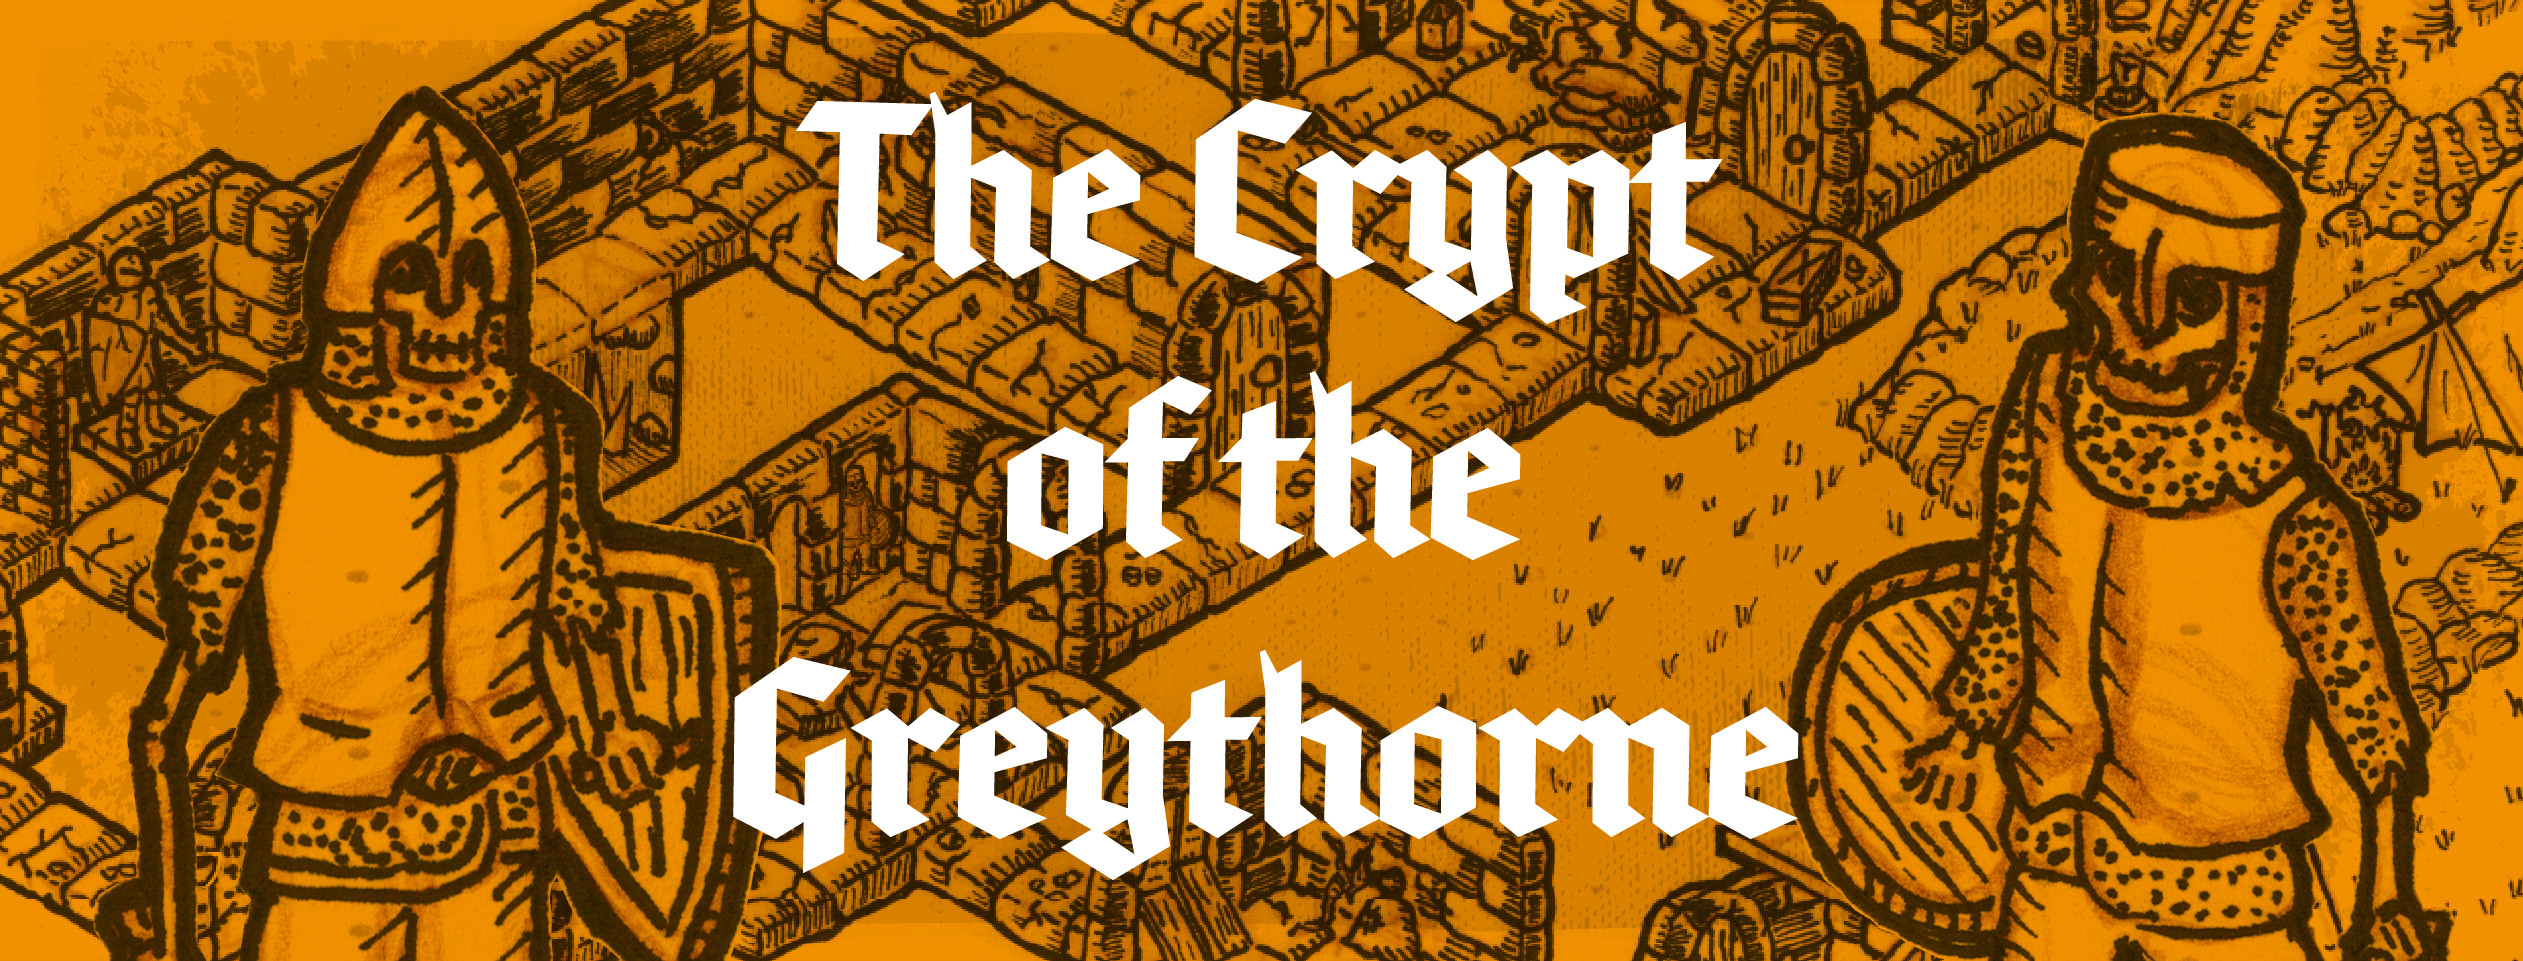 The Crypt of the Greythorne